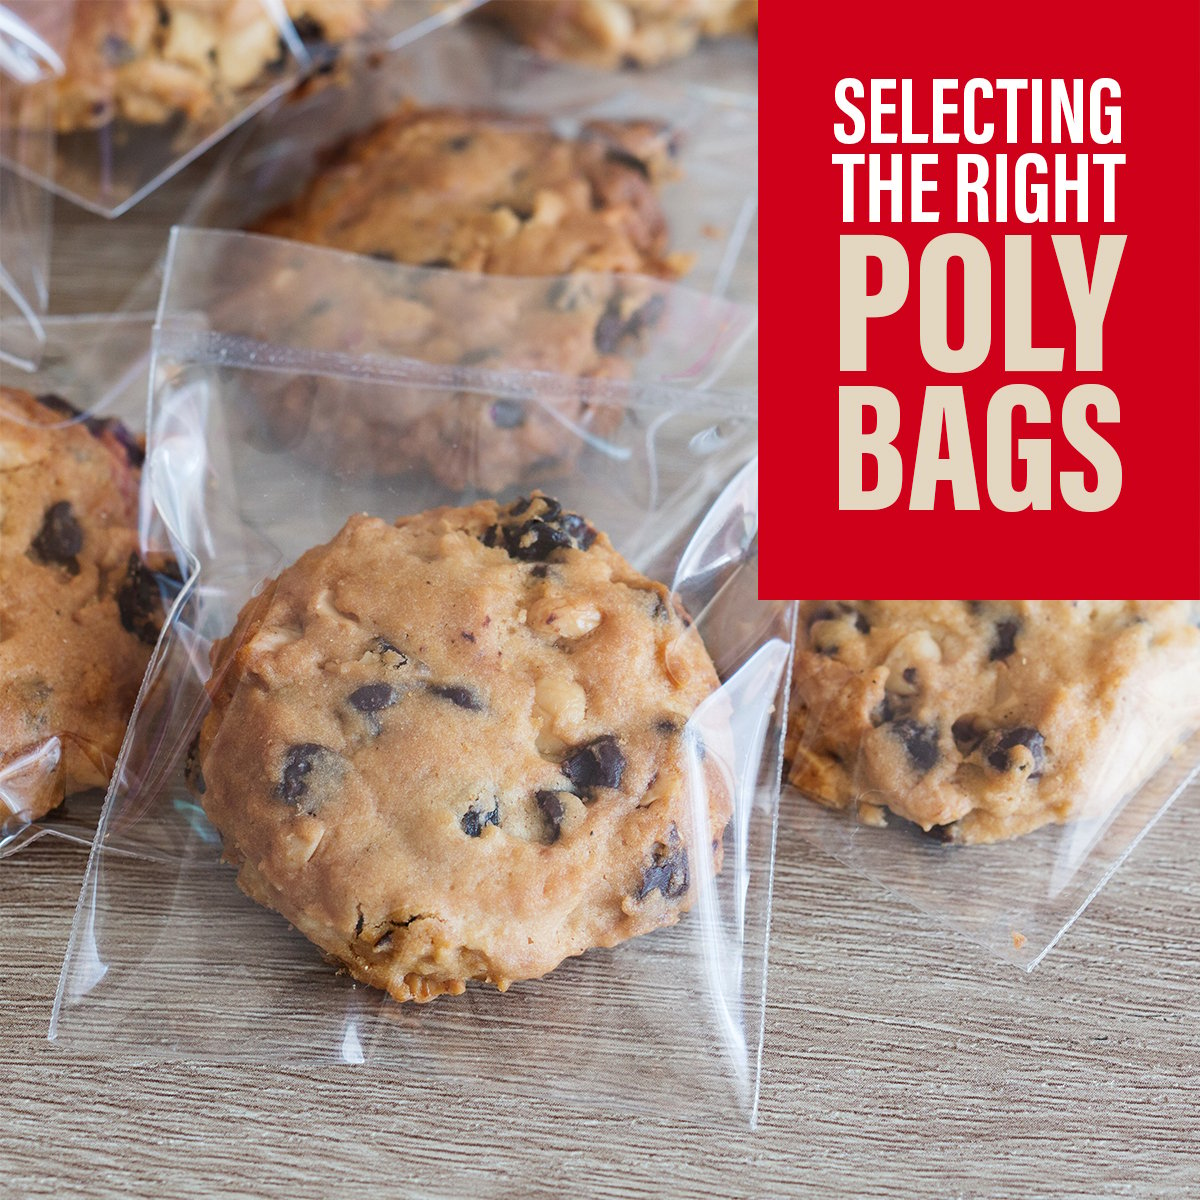 Help Your Customers Select The Right Poly Bags